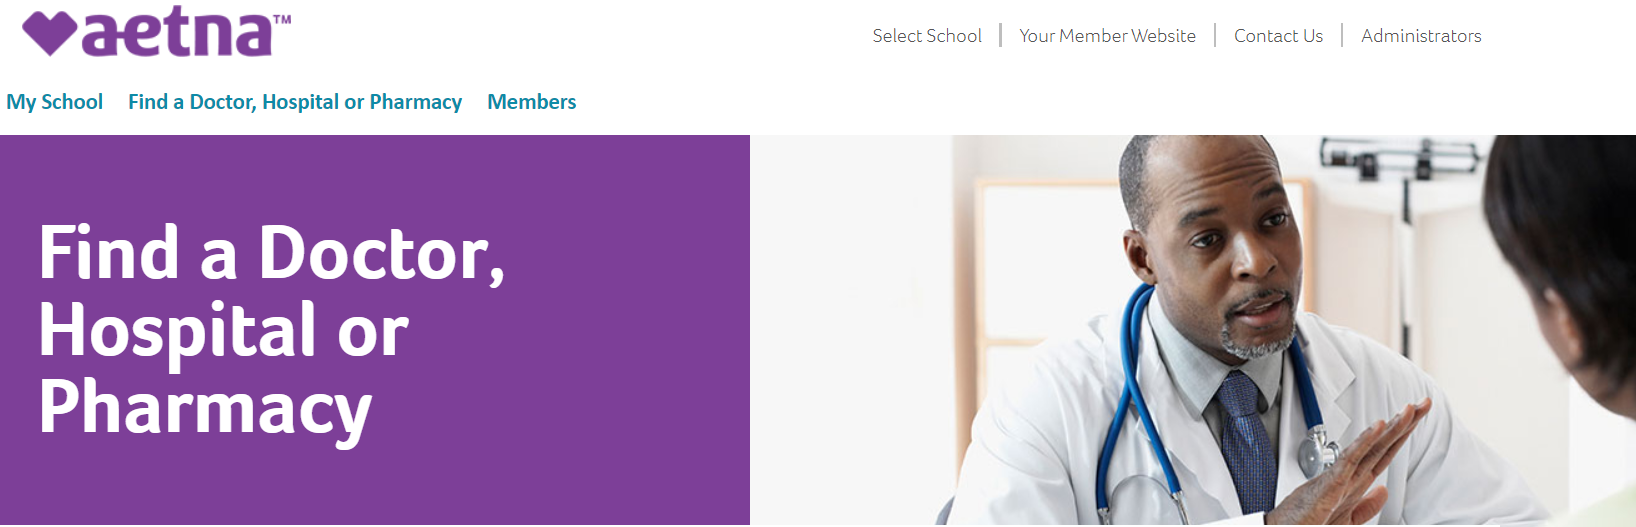 Go to Aetna Student Health website to use find a doctor tool